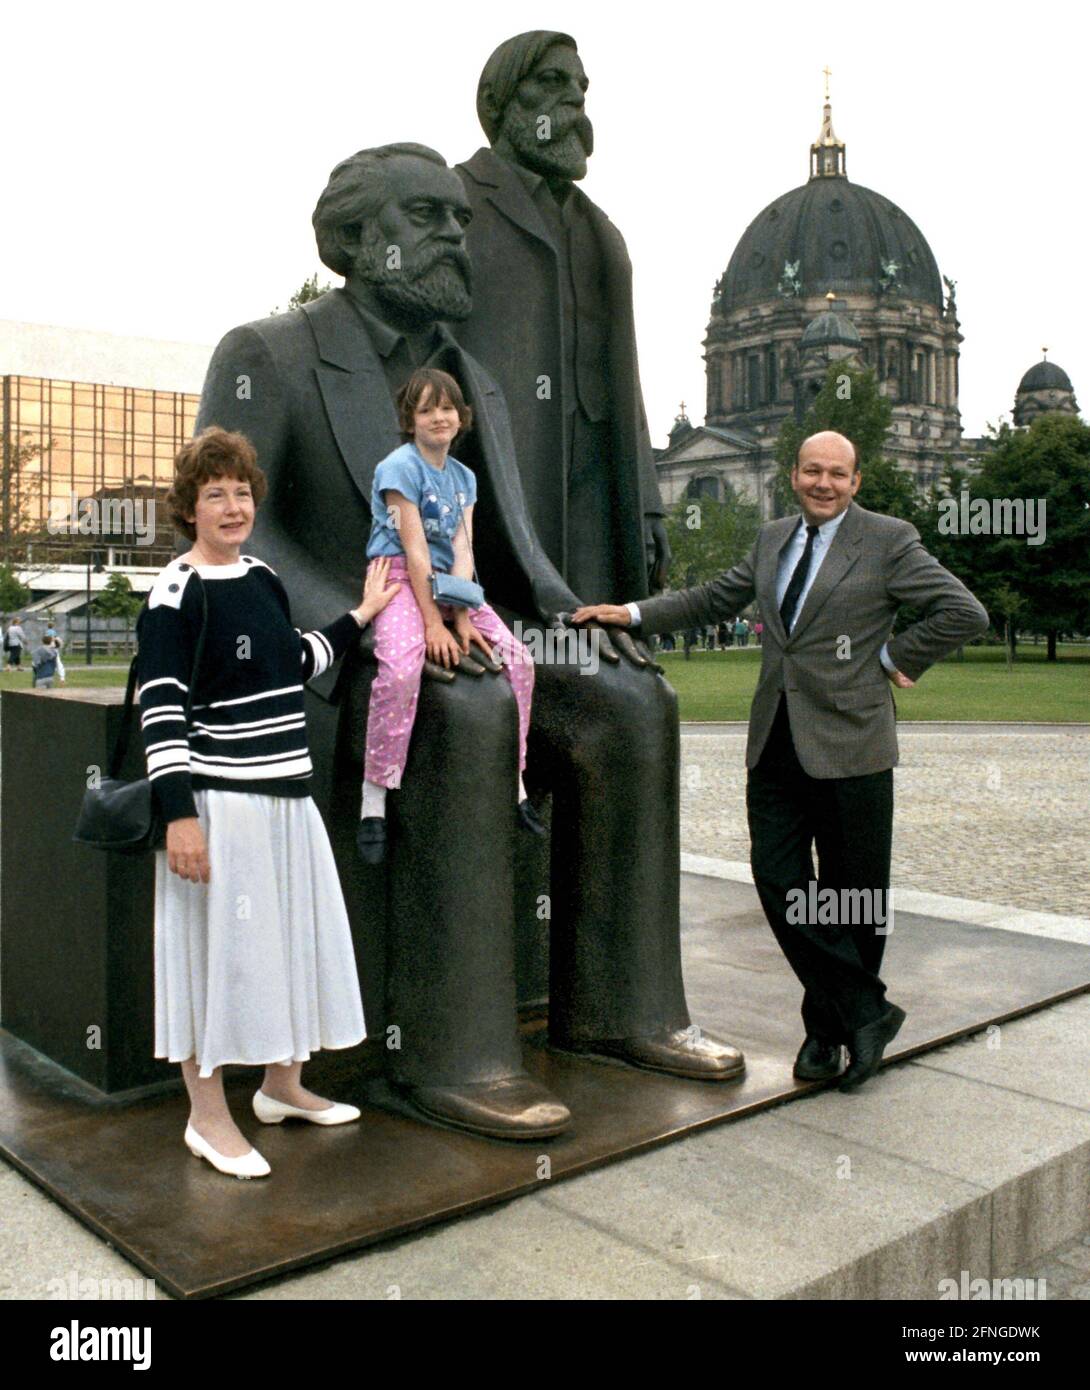 Berlin-City / GDR / Mitte / 1987 Walter Momper, Anne Momper, Friederike at the monument to Karl Marx and Friedrich Engels in what was then East Berlin. In the back the Berlin Cathedral.  The family makes an uninvited visit to East Berlin, on the occasion of the 750th anniversary of the city // Socialism / History / ** Walter Momper, his wife Anne and daughter Friederike at the Monument of Karl Marx and Friedrich Engels in former East (communist) Berlin. The family visits the eastern part of the city without invitation on the occasion the 750th anniversary of Berlin. It was highly political. Stock Photo